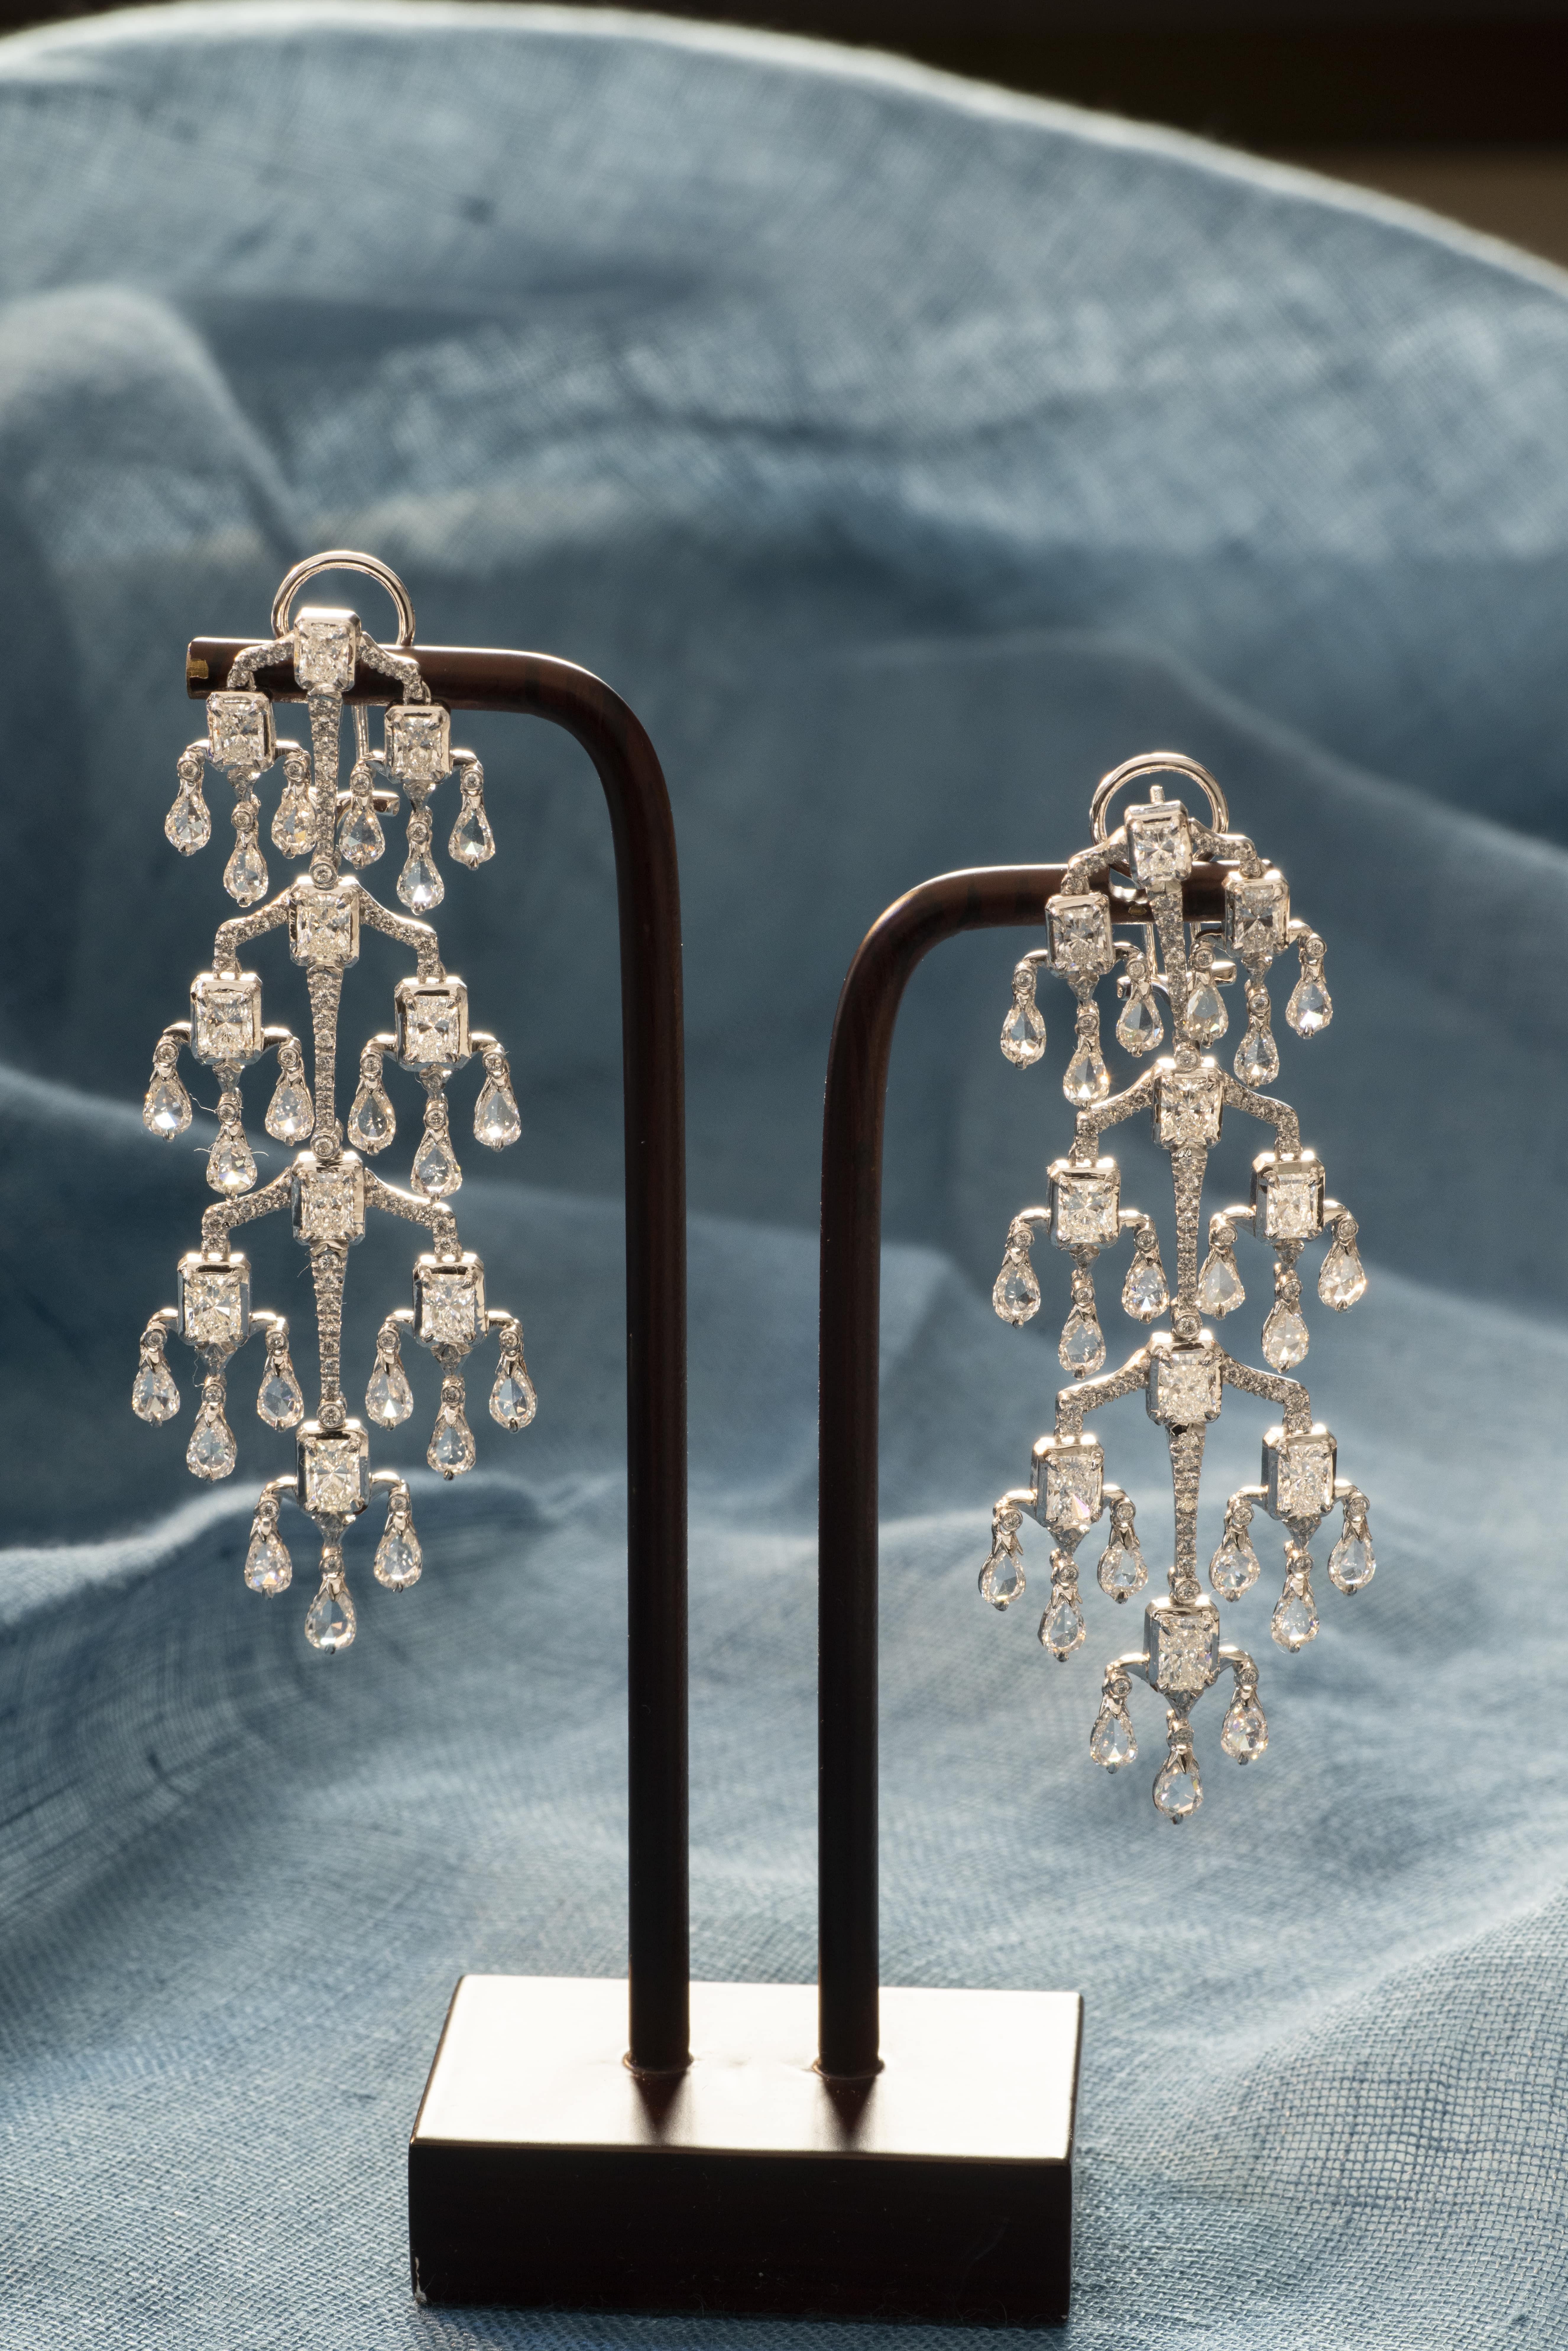 Stunning chandelier diamond earrings in 18 karat white gold with pear-shape, asscher-cut and round, brilliant-cut diamonds.

They say that chandeliers are the jewelry of architecture. Here, we have taken the iconic chandelier and transformed it into